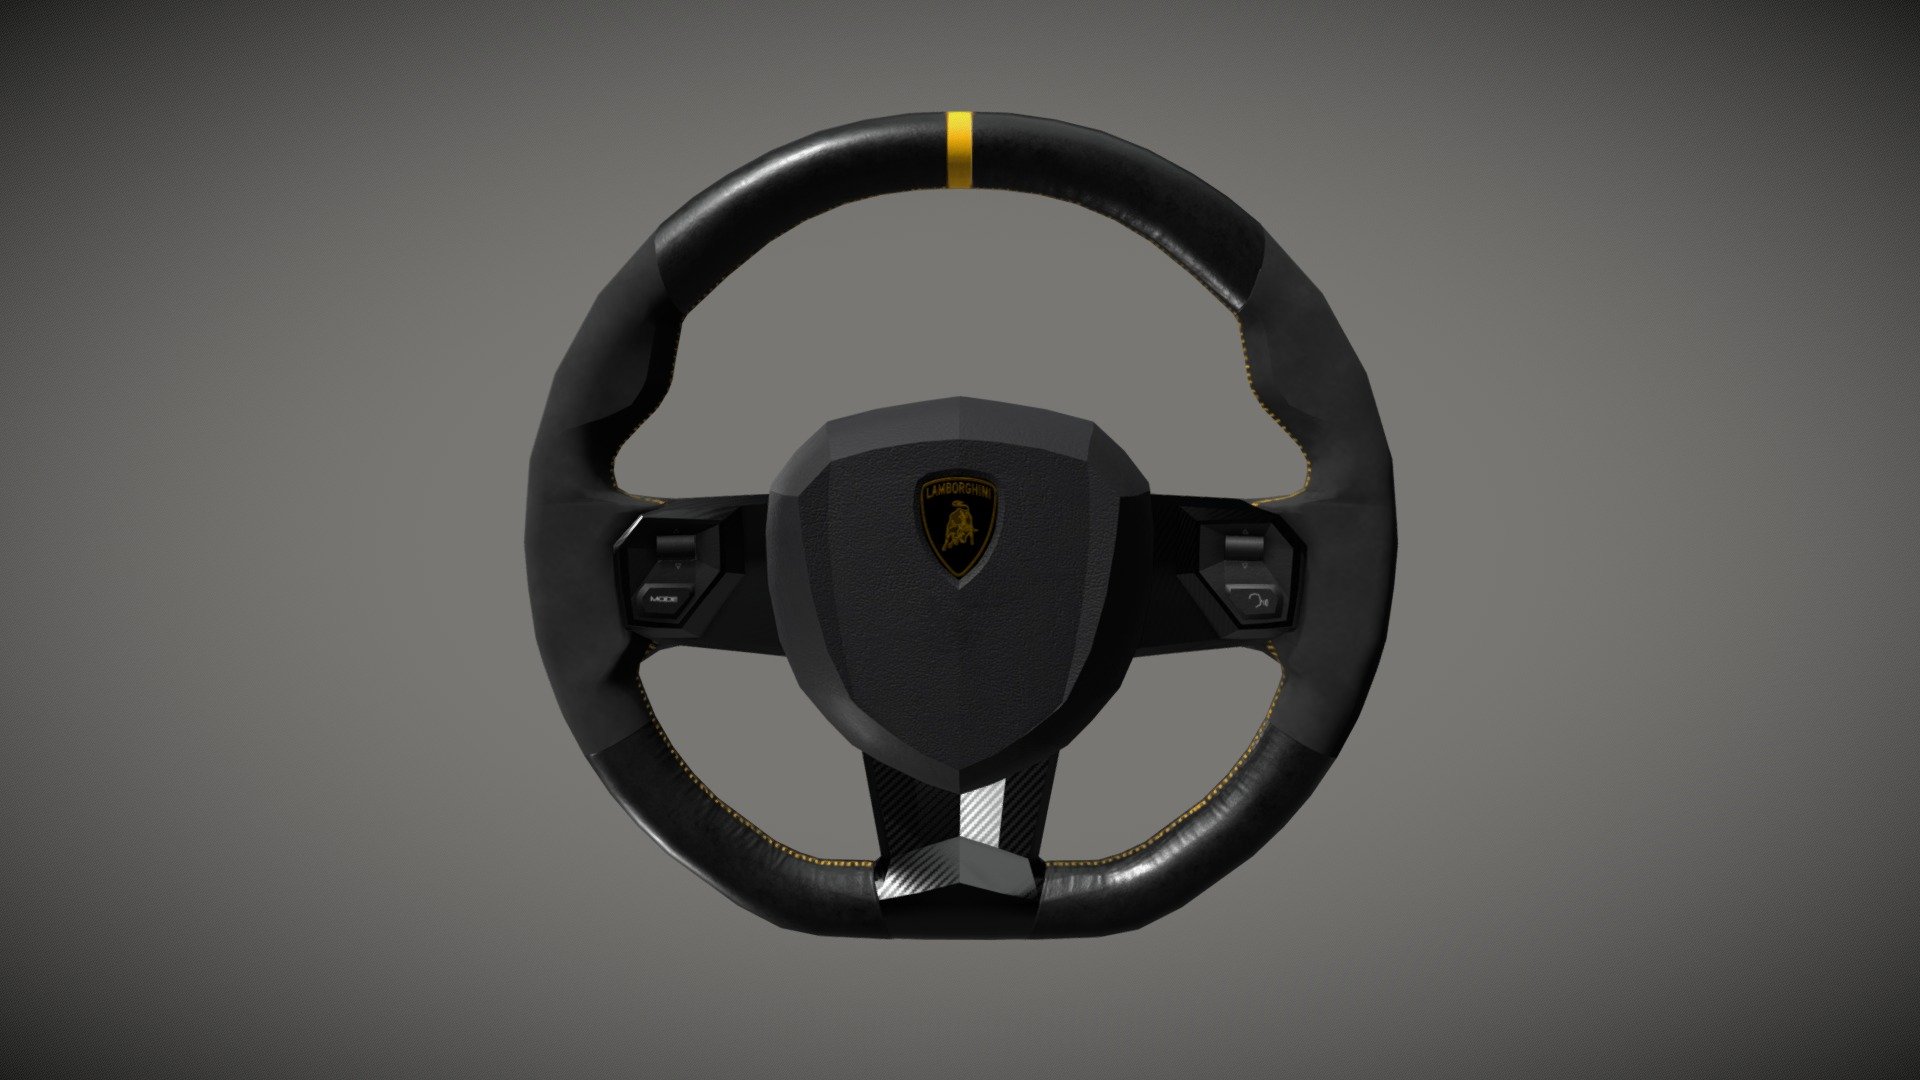 3D model Lamborghini Aventador Steering Wheel made in Autodesk Maya 2020 and textured in Substance Painter. 
Texture size: 2048x2048 - Lamborghini Aventador Steering Wheel - 3D model by P7PO (@PiPo07) 3d model